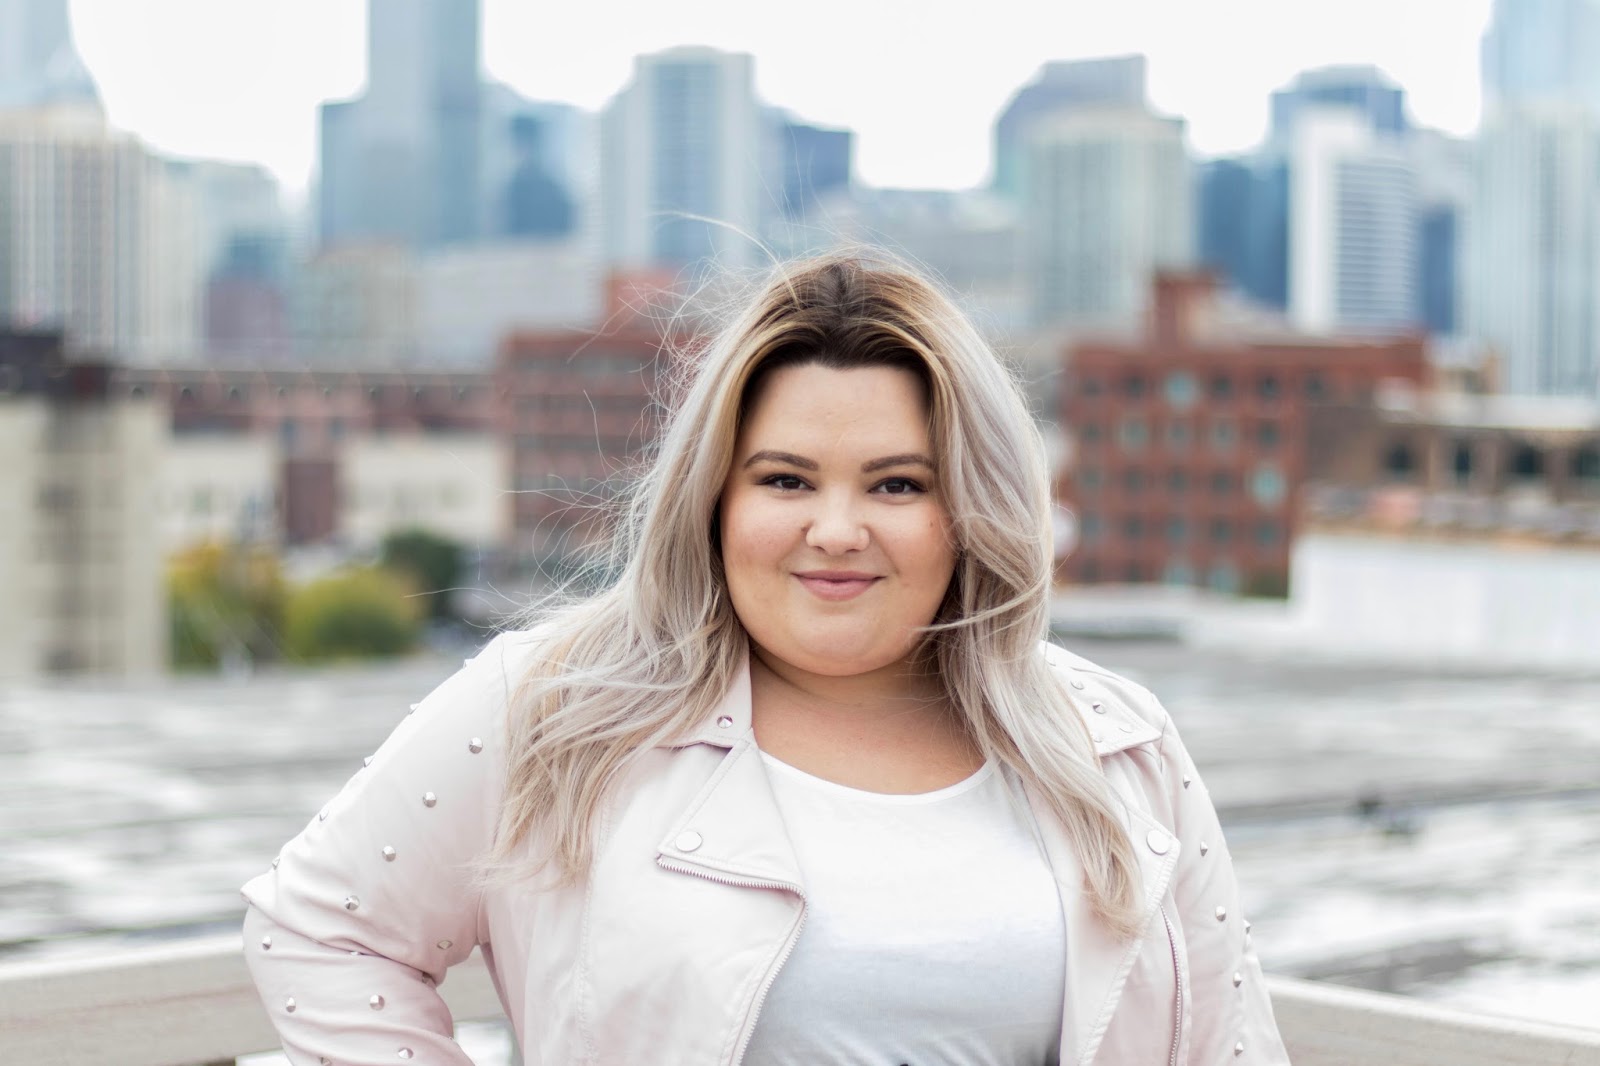 natalie in the city, natalie Craig, plus size fashion blogger, Chicago plus size fashion blogger, body positive, Charlotte Russe, affordable plus size clothes, wide calf knee high boots, wide boots, plus size boots, wide calf, curves and confidence, refinery 29, the 67 percent project, plus size dating, Chicago, Chicago fashion, Chicago skyline